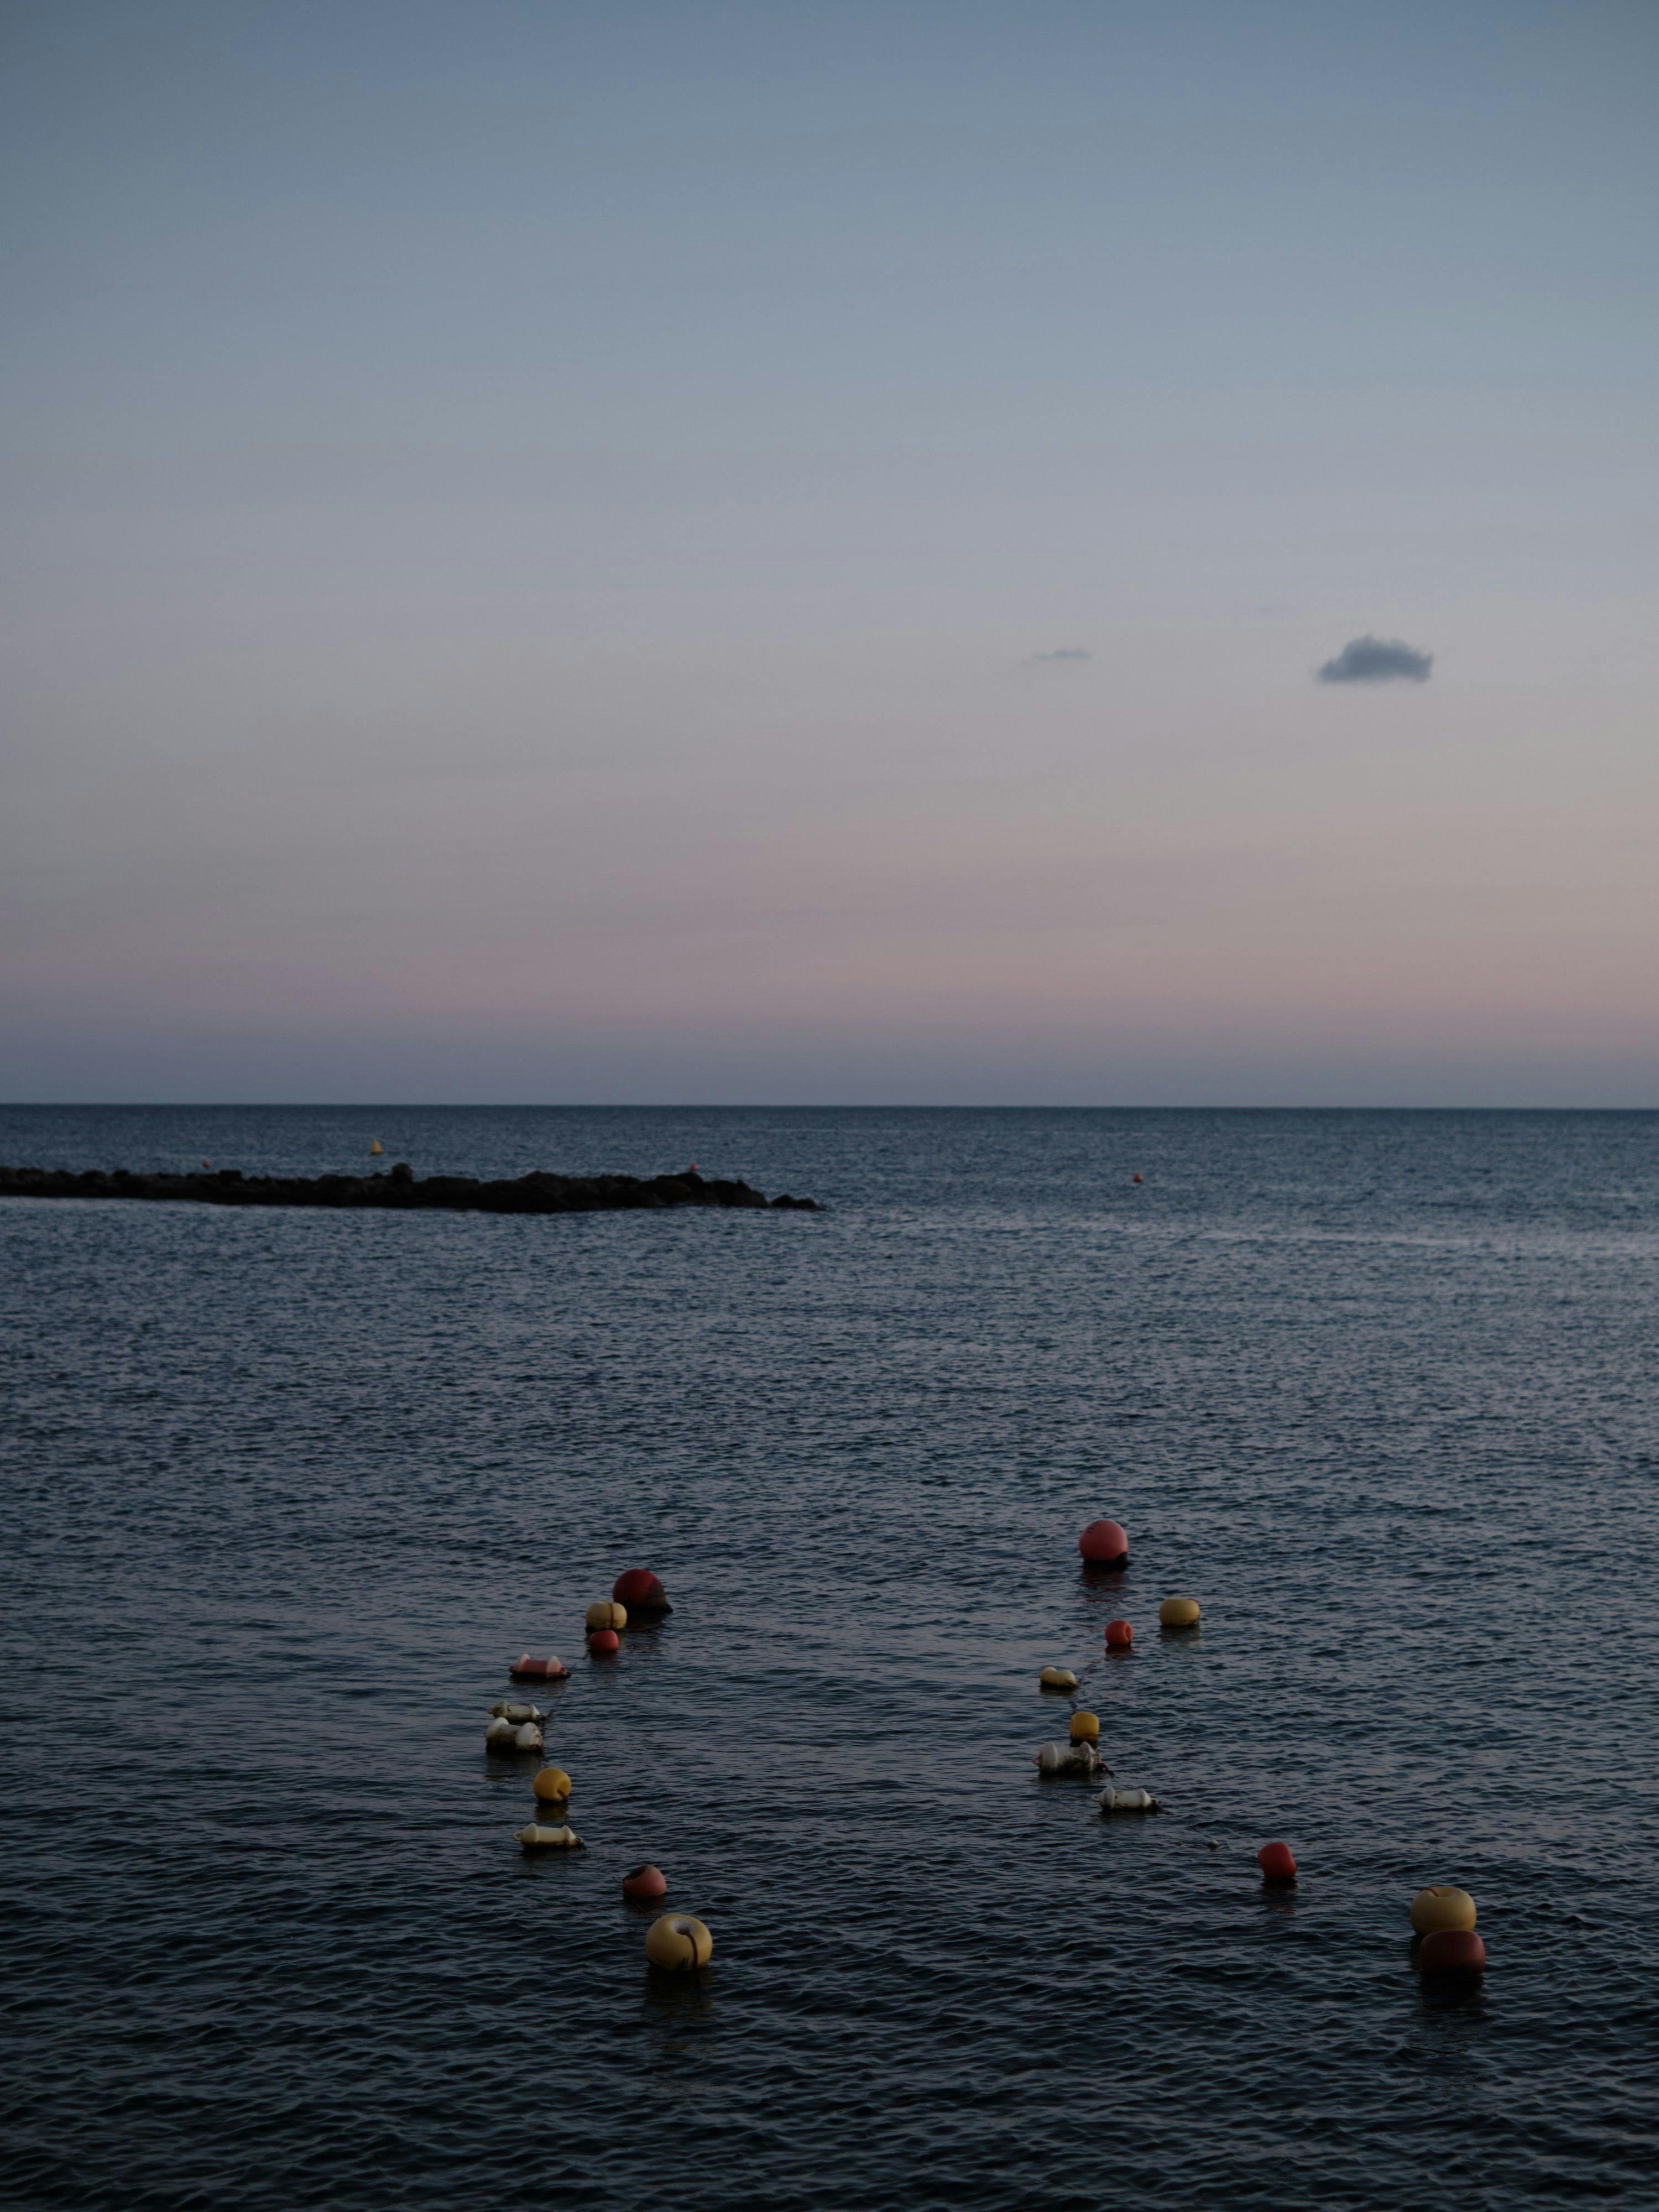 A series of buoys to guide small boats out to sea at dusk